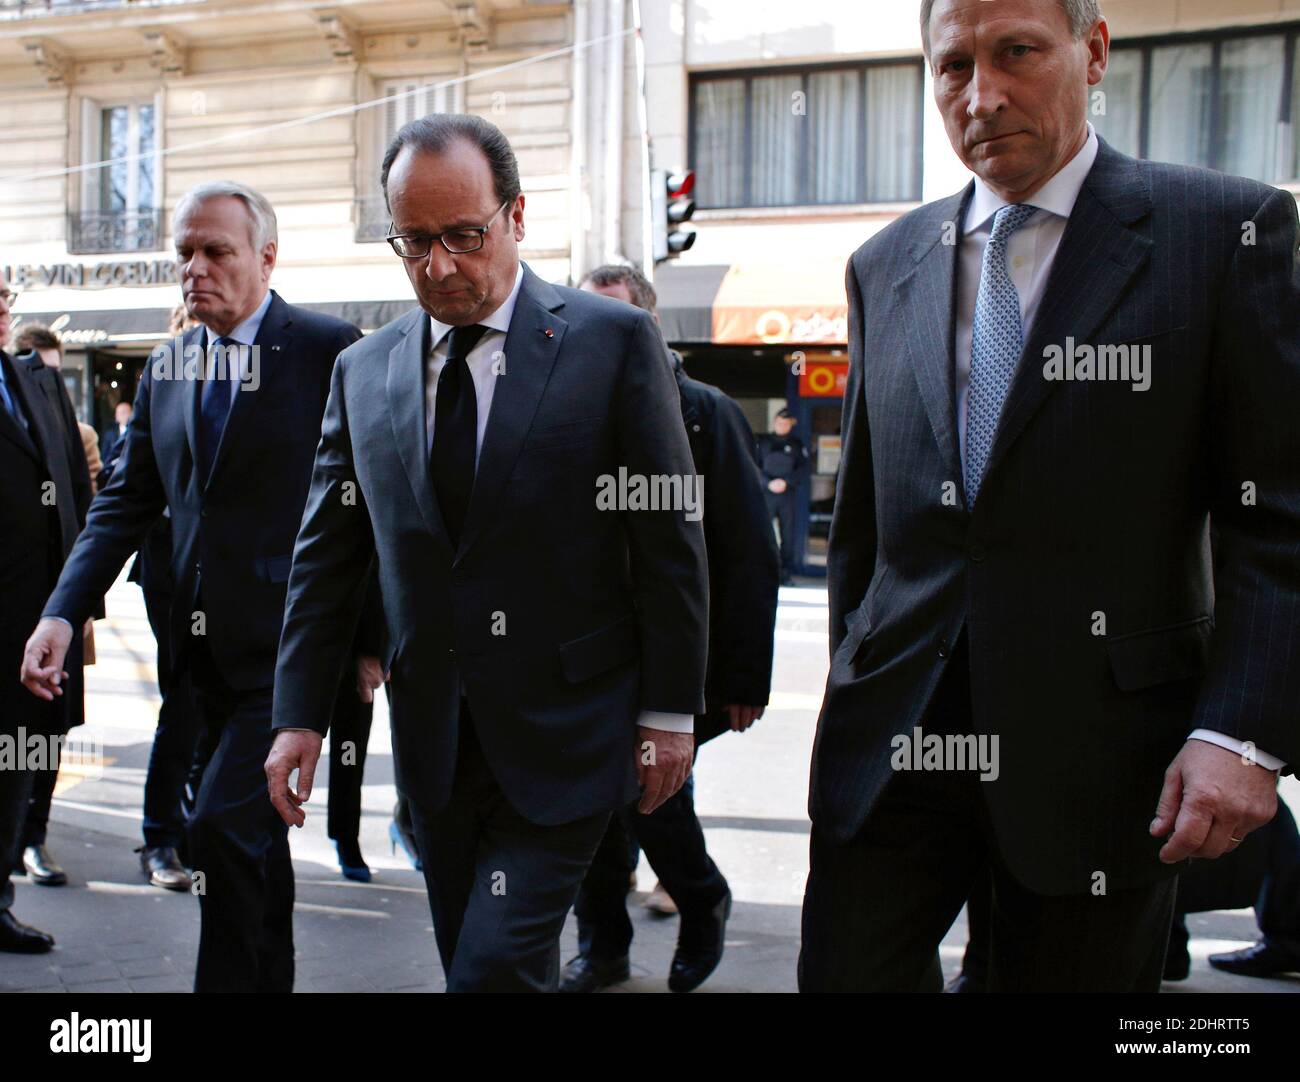 France's President Francois Hollande (C) and Minister of Foreign Affairs and International Development Jean-Marc Ayrault (L) are welcomed by Belgium's Ambassador to France Vincent Mertens de Wilmars as they arrive at the Belgium embassy to pay homage to the victims of the Brussels terror attacks, in Paris, France on Tuesday, March 22, 2016. Bombs exploded at the Brussels airport and one of the city's metro stations earlier today, killing at least 34 and injuring dozens of people. The Islamic State group claimed responsibility for the attacks. Photo by Thibault Camus/Pool/ABACAPRESS.COM Stock Photo